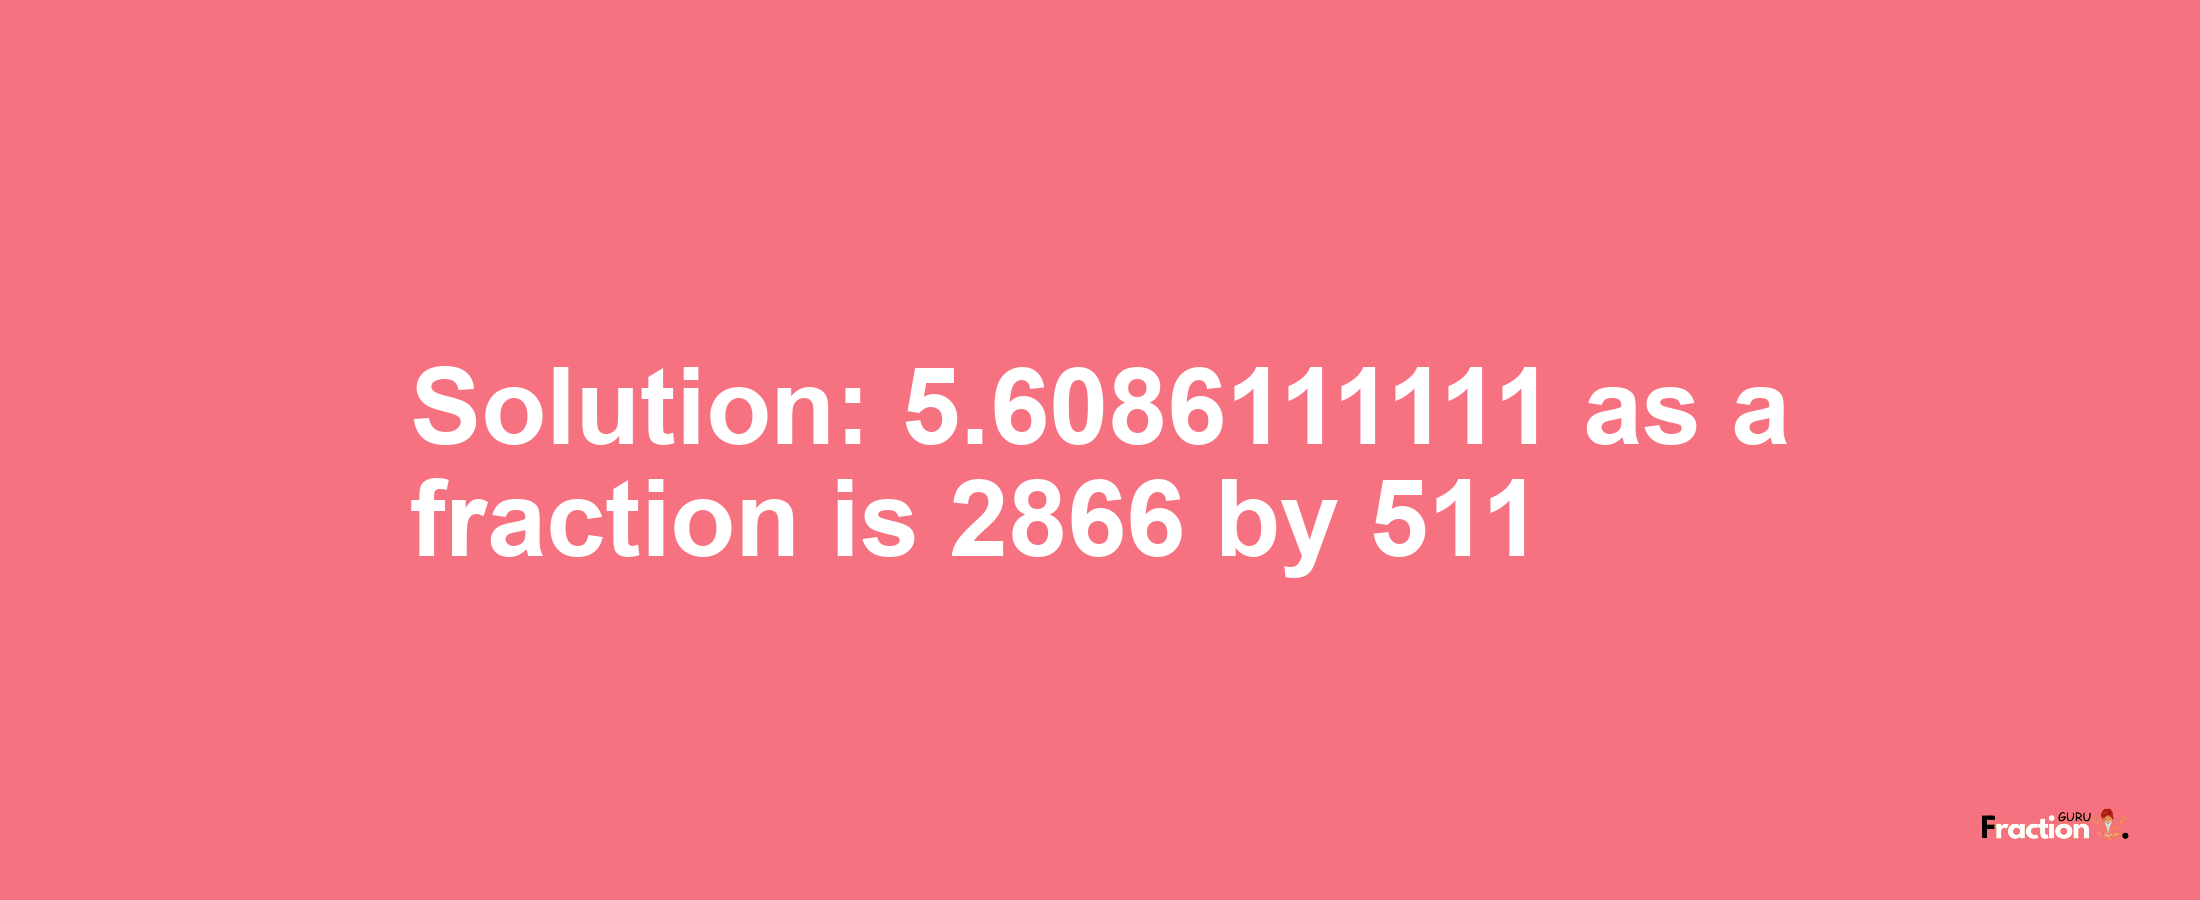 Solution:5.6086111111 as a fraction is 2866/511